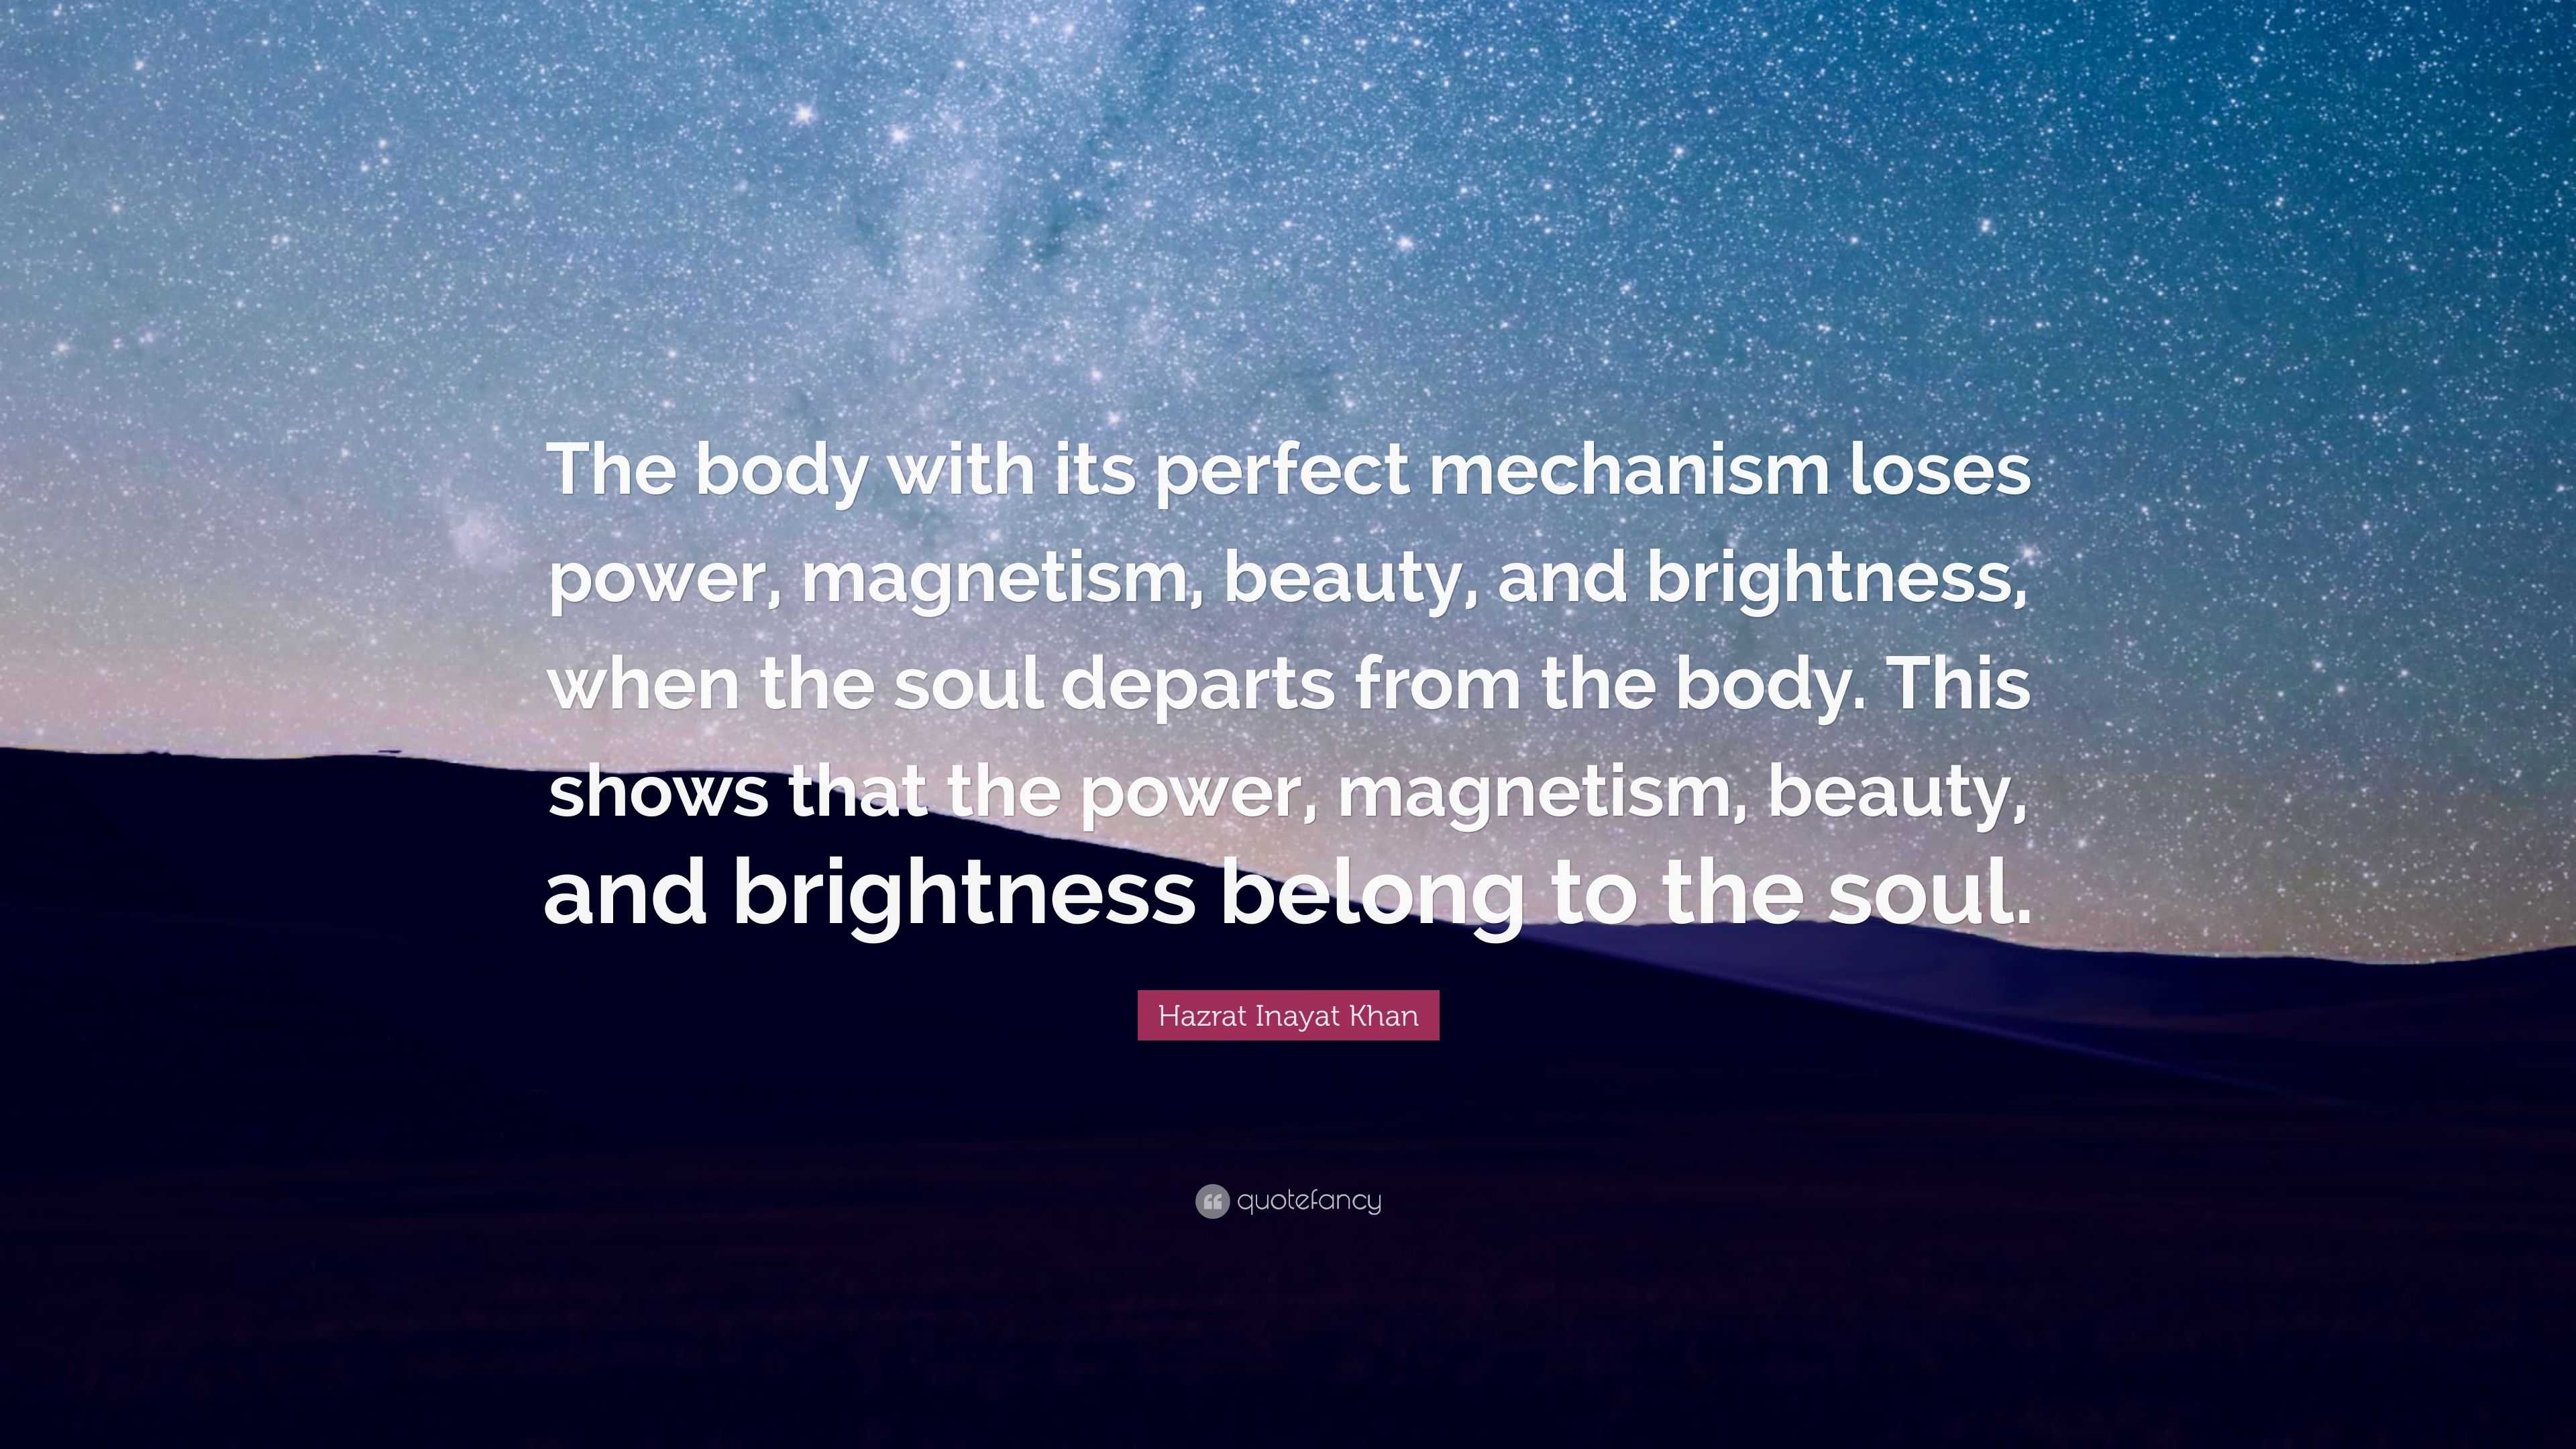 Hazrat Inayat Khan Quote: “The body with its perfect mechanism loses ...